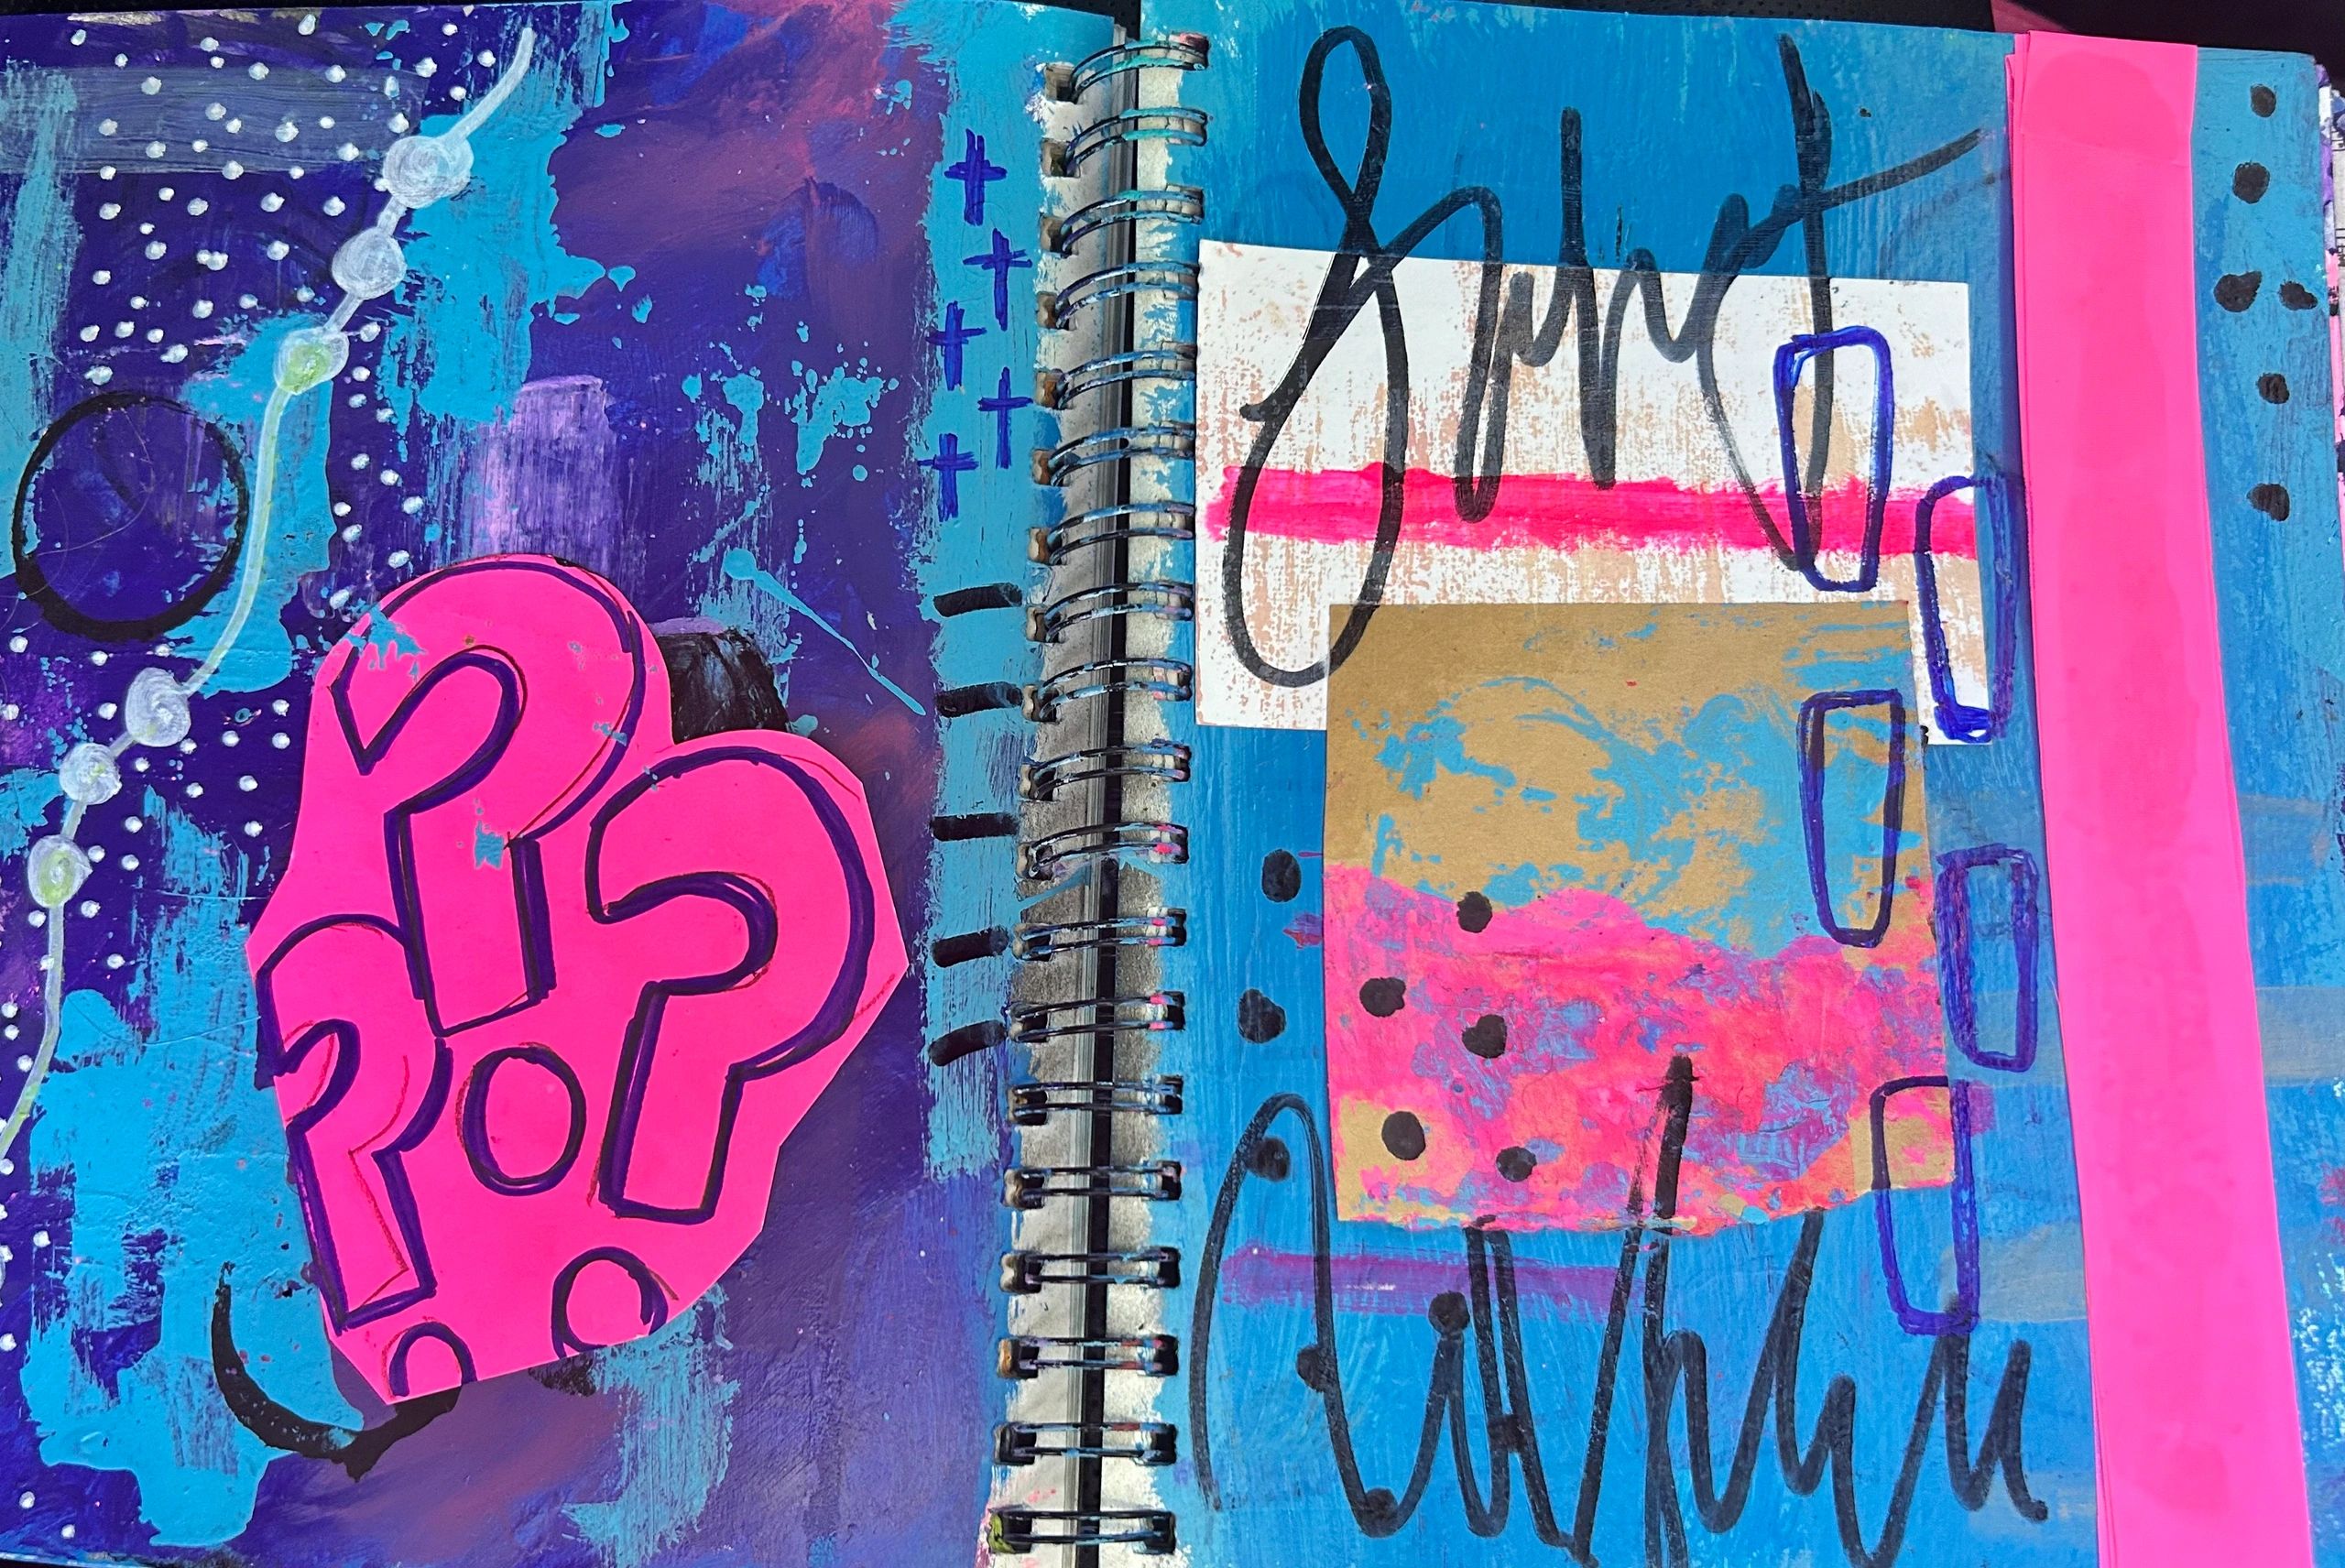 So this mixedart journal spread was made with acrylic paints, craft paper, index cards, and ribbon. 